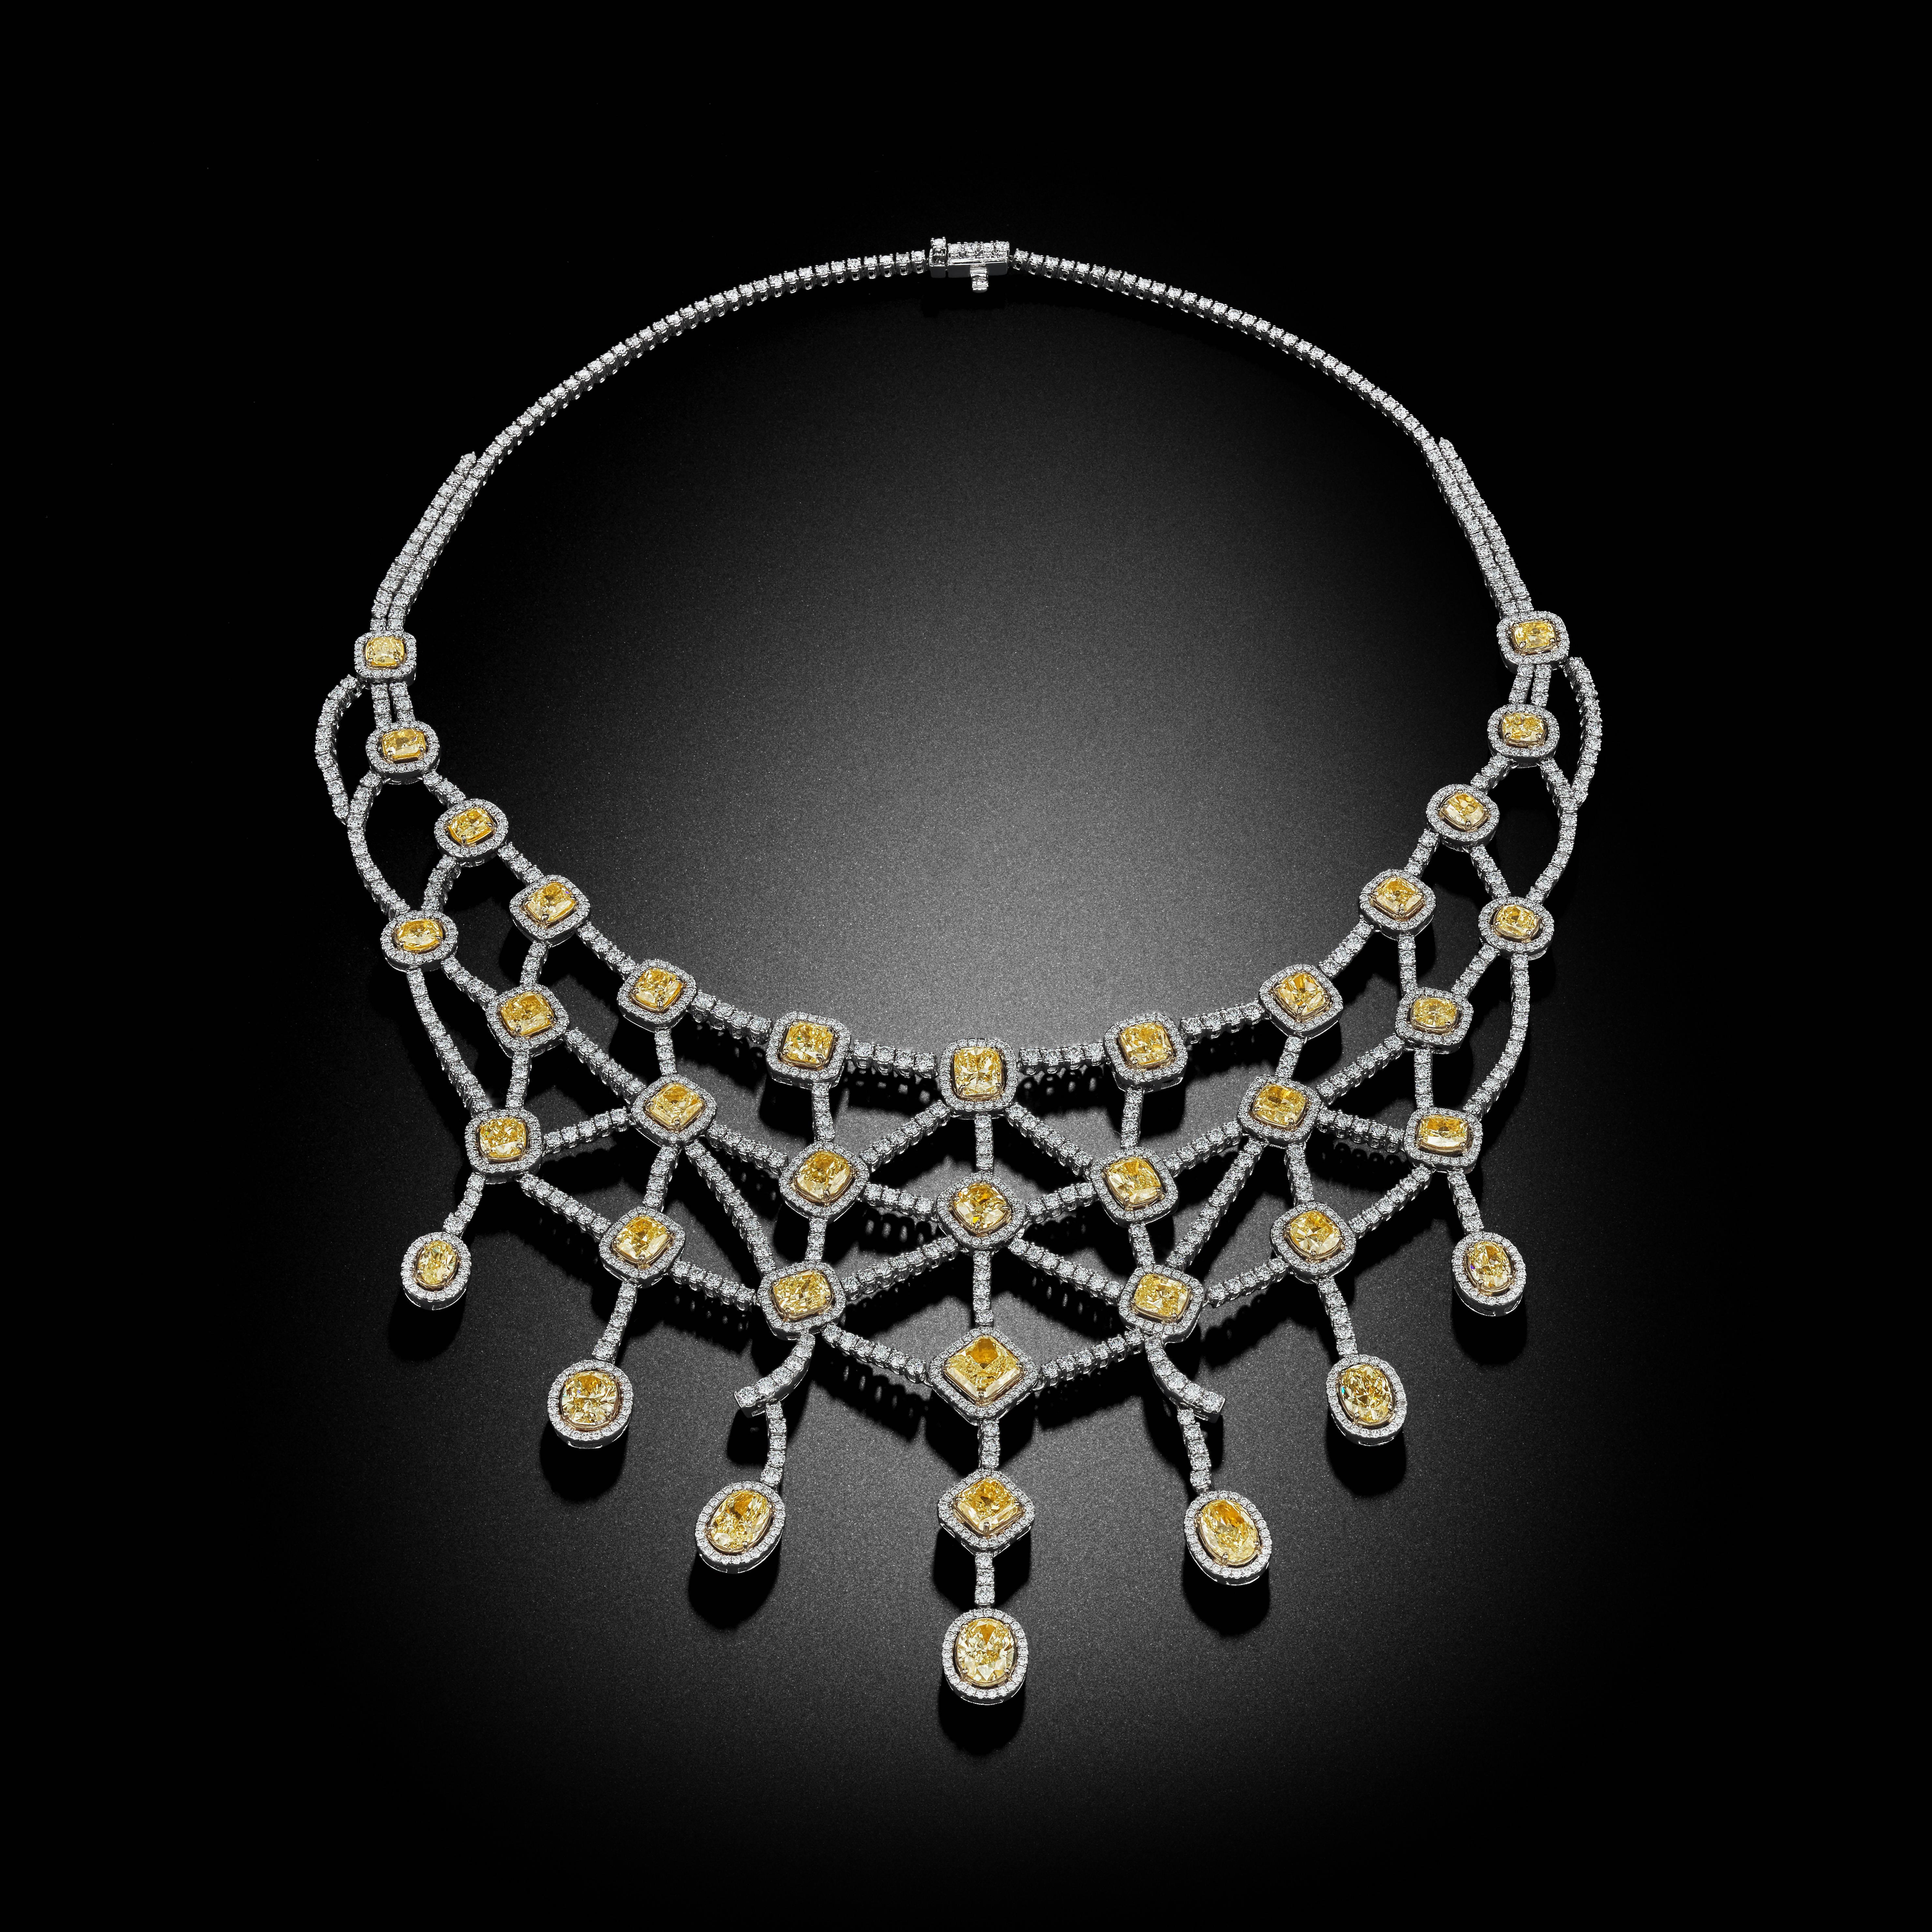 Over 51 Carat total weight of a spectacular White and Fancy Yellow Multi Shape Diamonds are featured in this breathtaking necklace. Set into a design of gossamer 18k white and yellow gold, this masterpiece captures the essence of symmetry and beauty